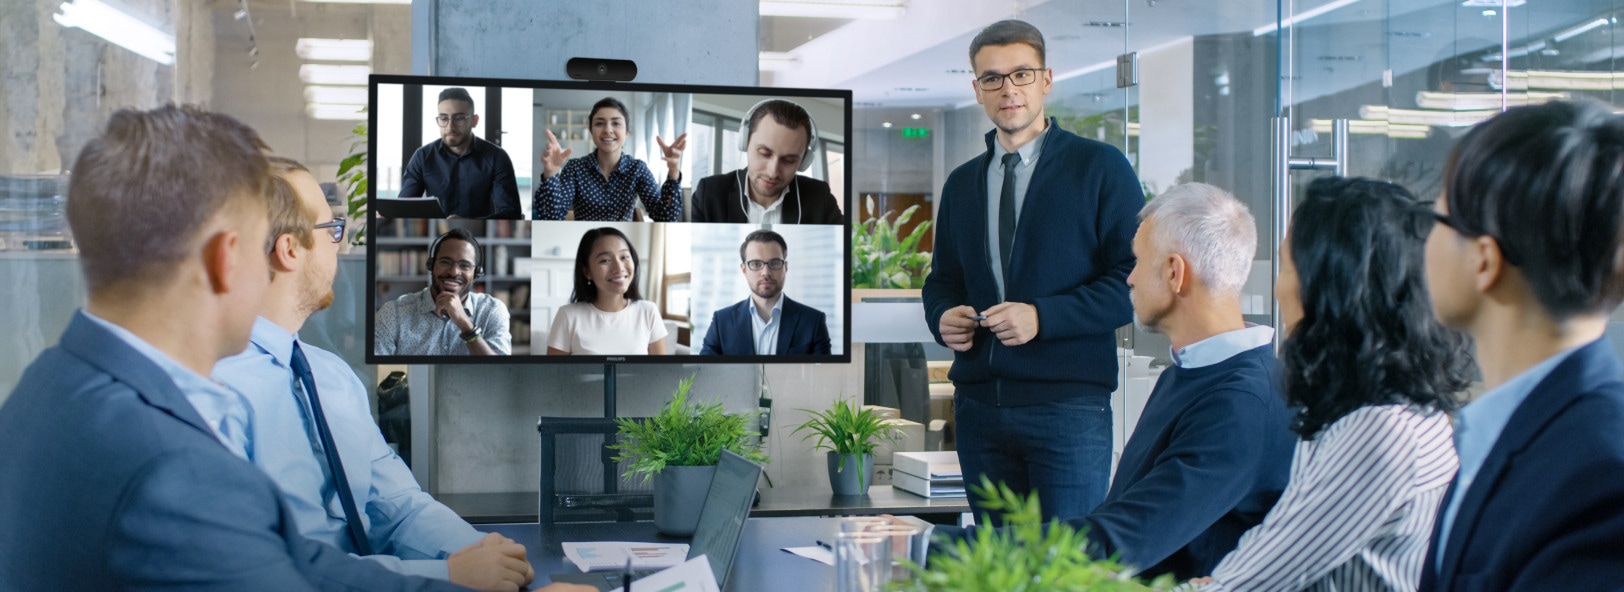 Video conferencing banner 